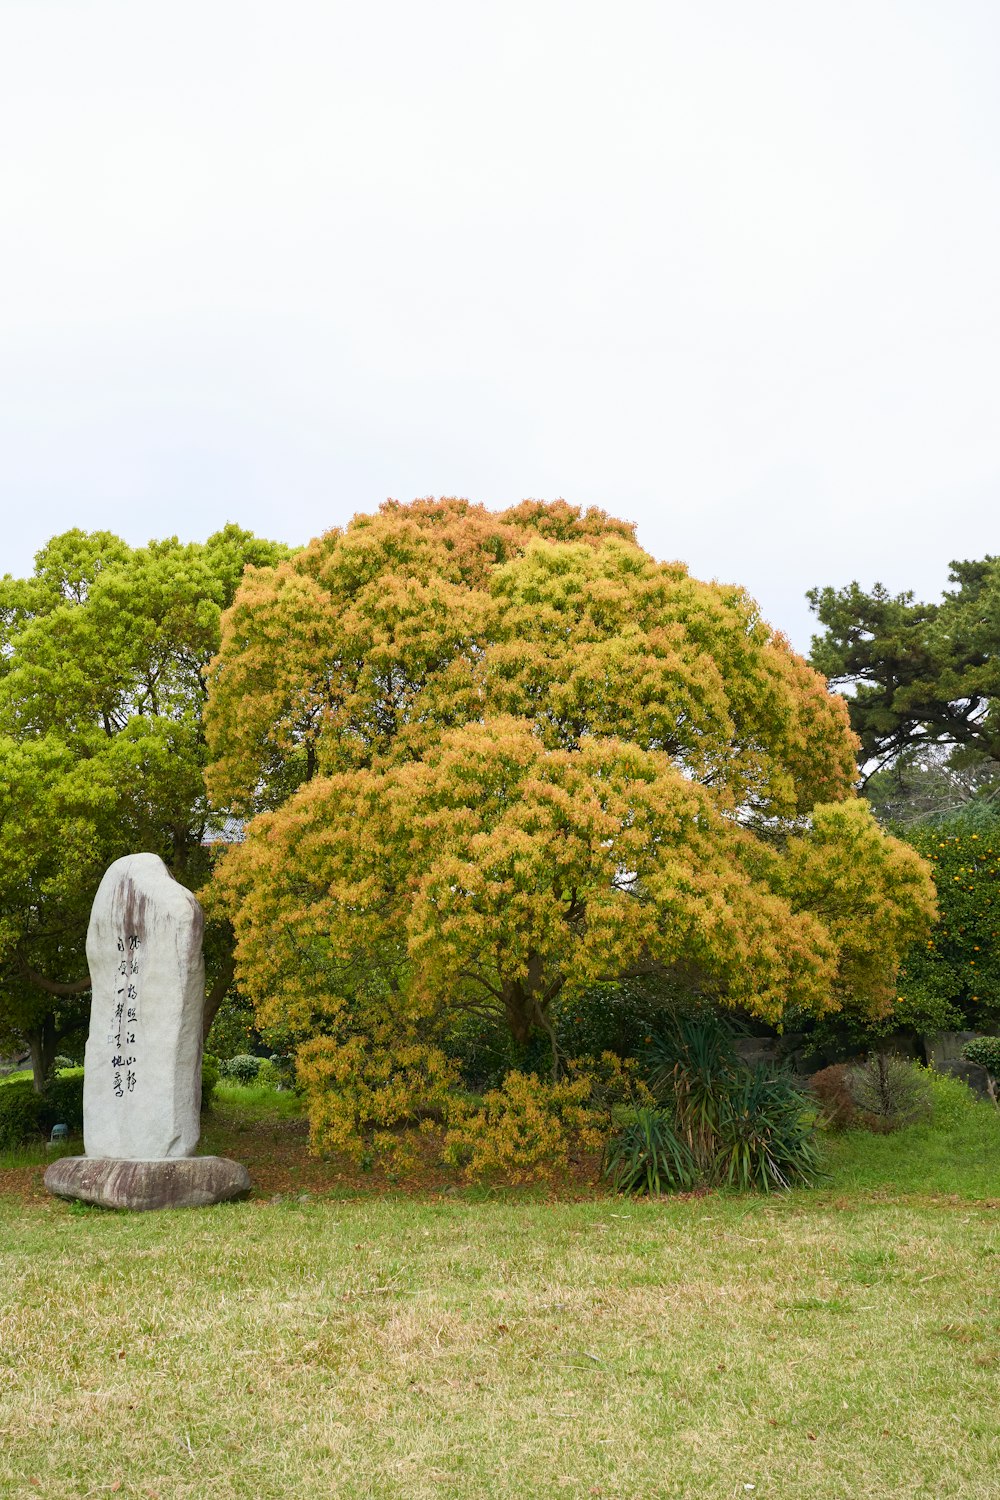 a large tree in the middle of a grassy area